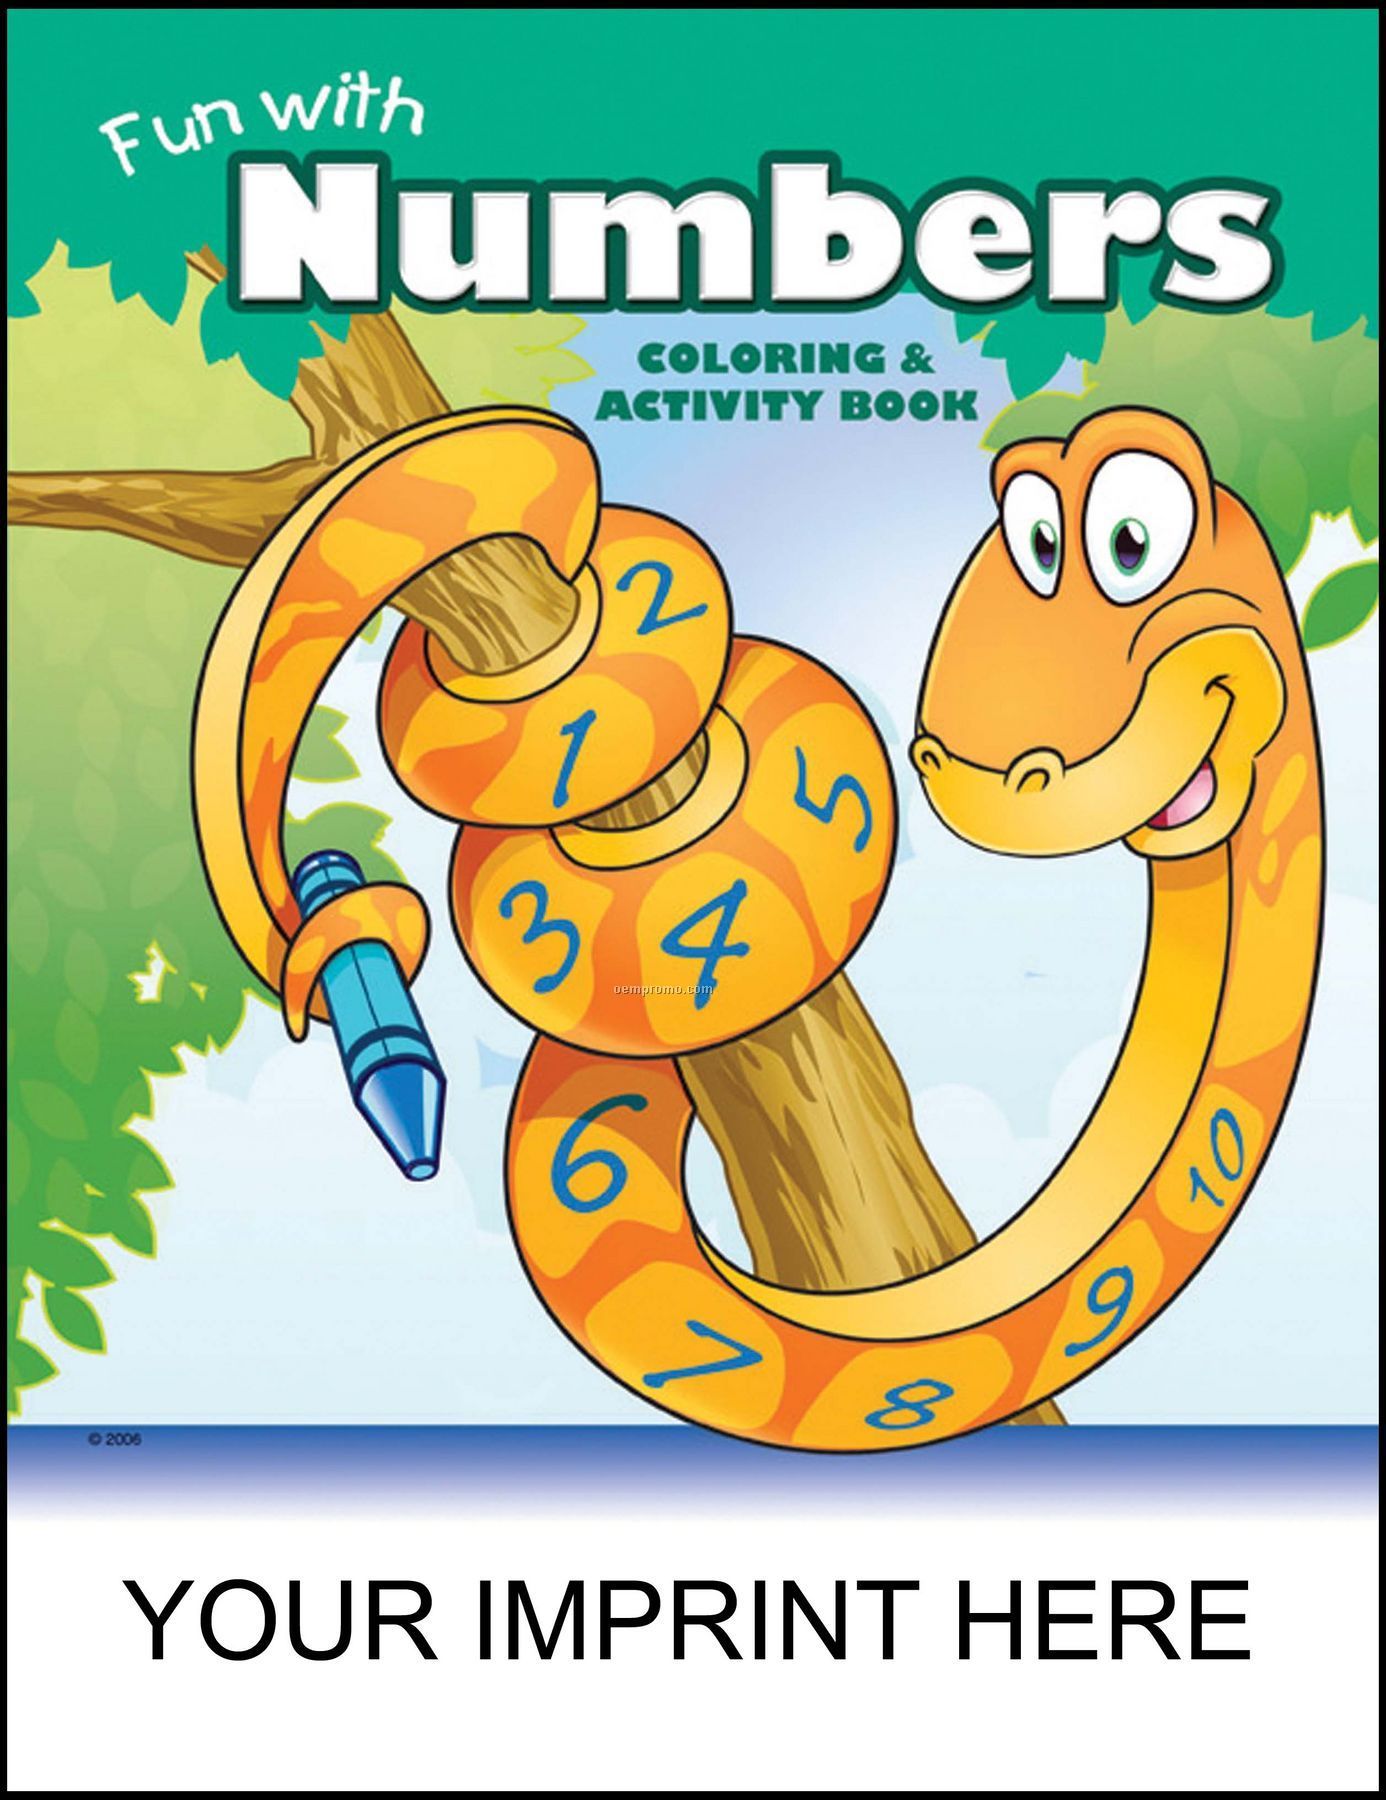 Fun With Numbers Coloring & Activity Book